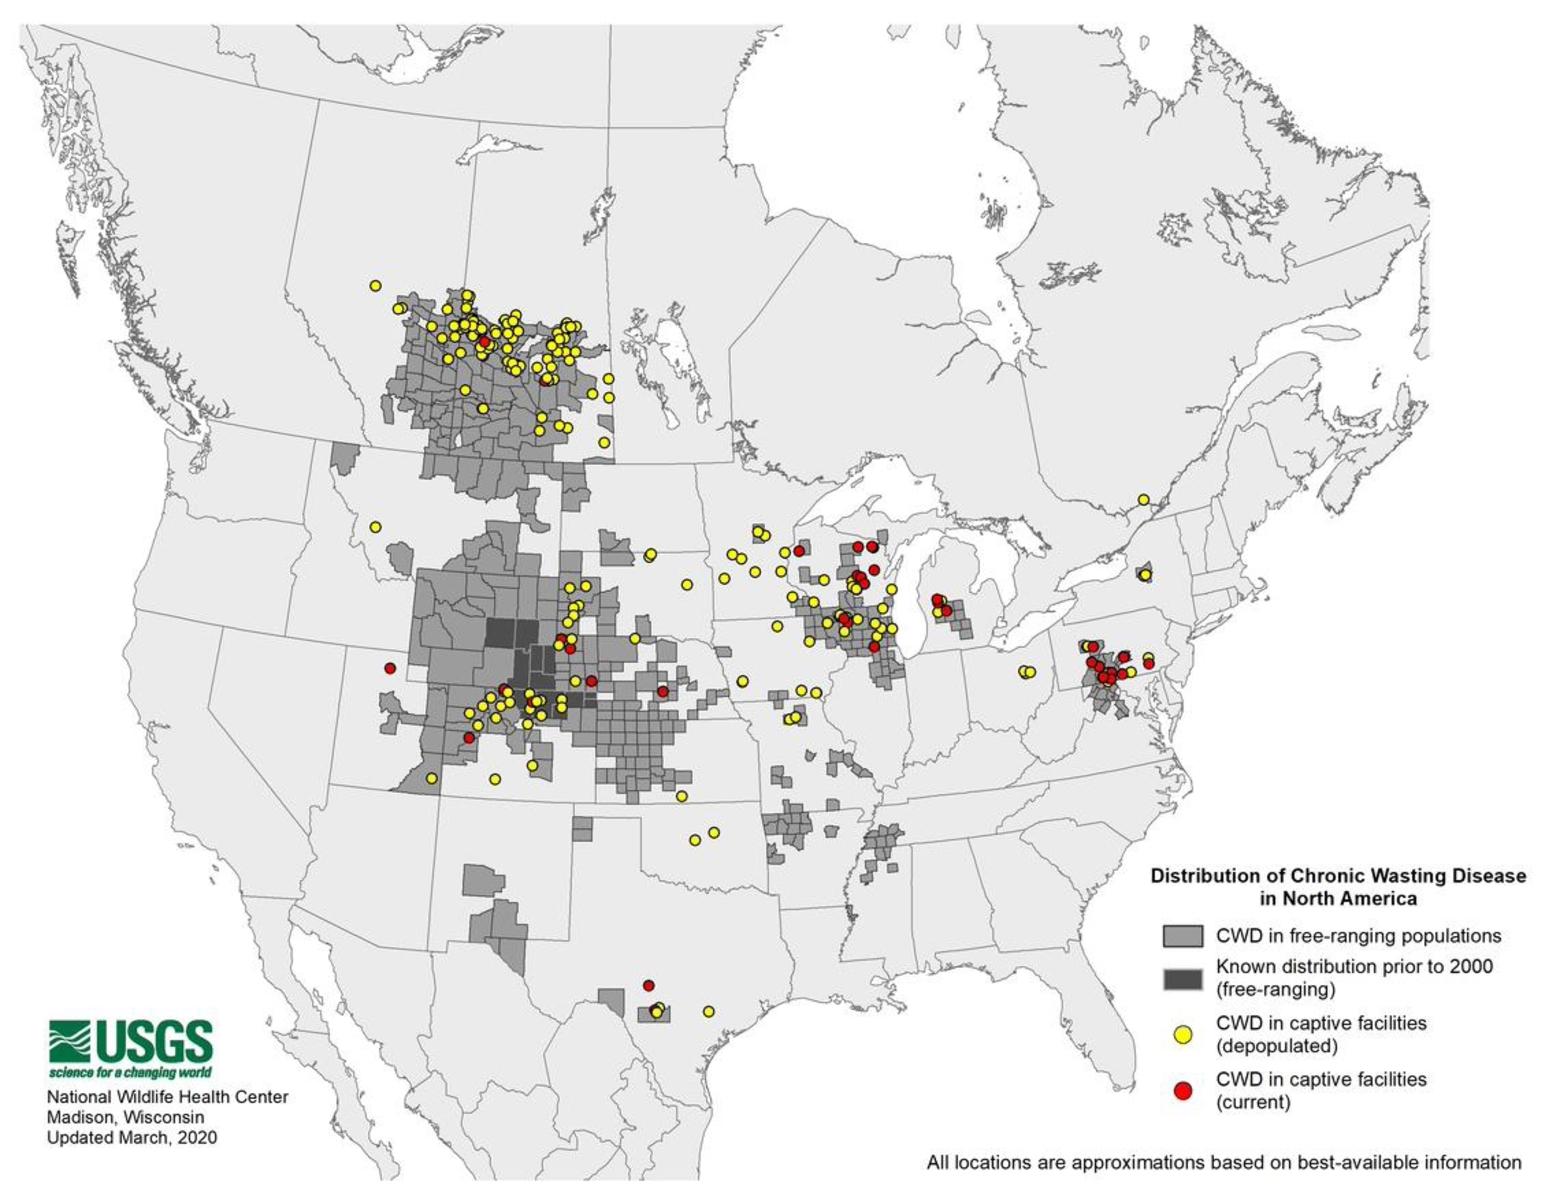 Map showing states and Canadian provinces where CWD is now present as of March 2020. The only state nearly completed classified as endemic? Wyoming. Graphic courtesy USGS National Wildlife Health Center, Madison, Wisc.